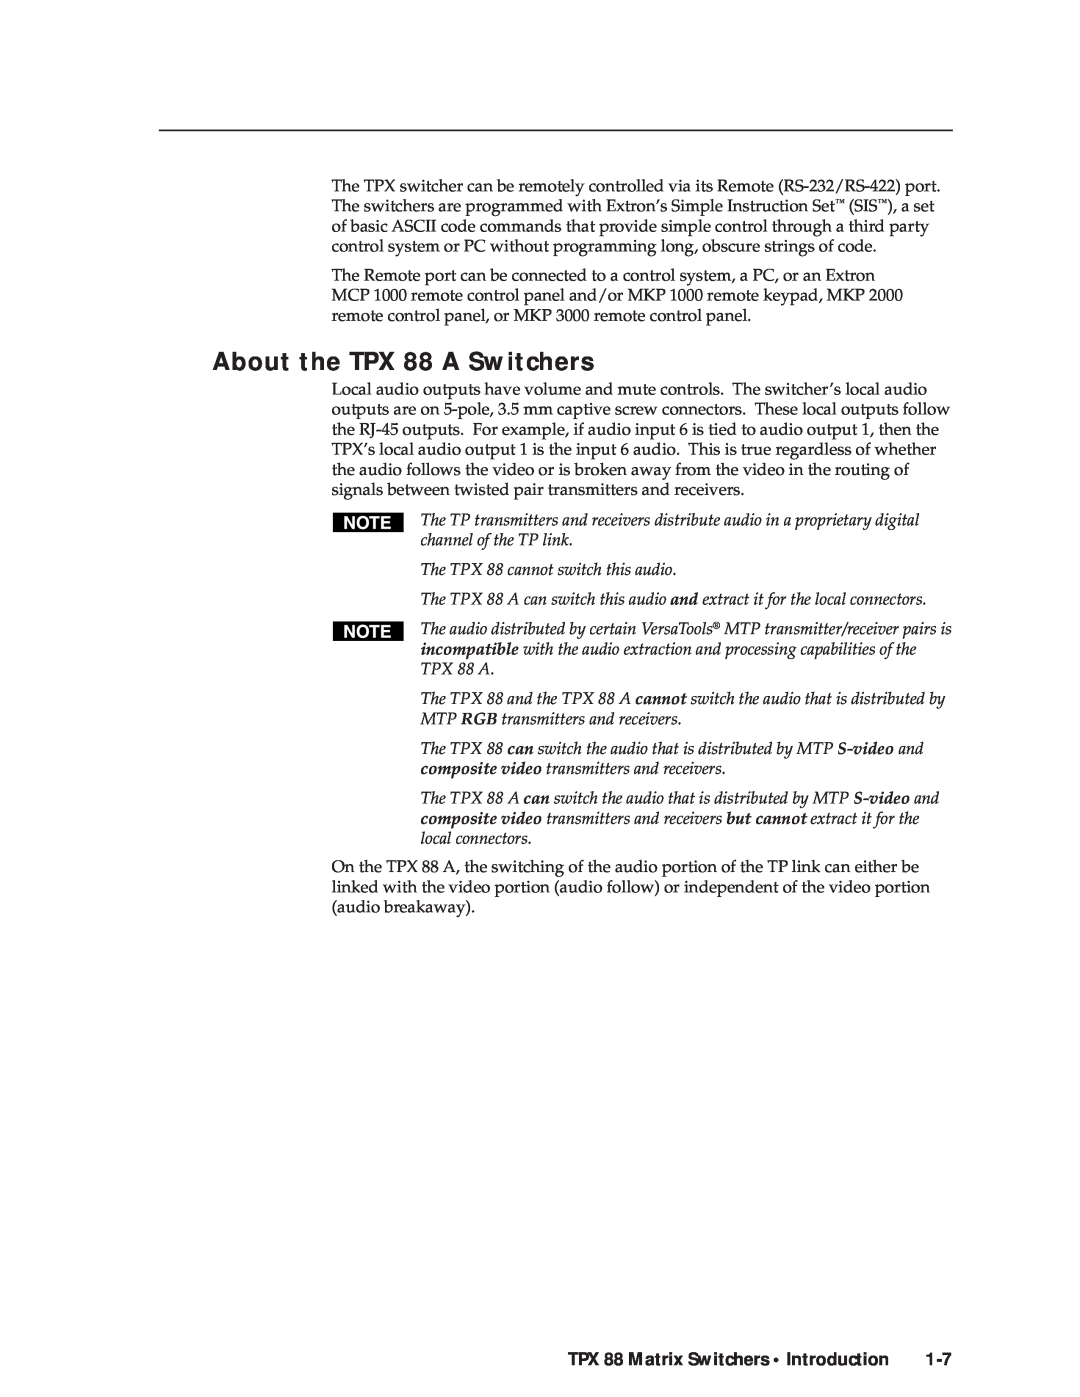 Extron electronic manual About the TPX 88 A Switchers, TPX 88 Matrix Switchers Introduction 